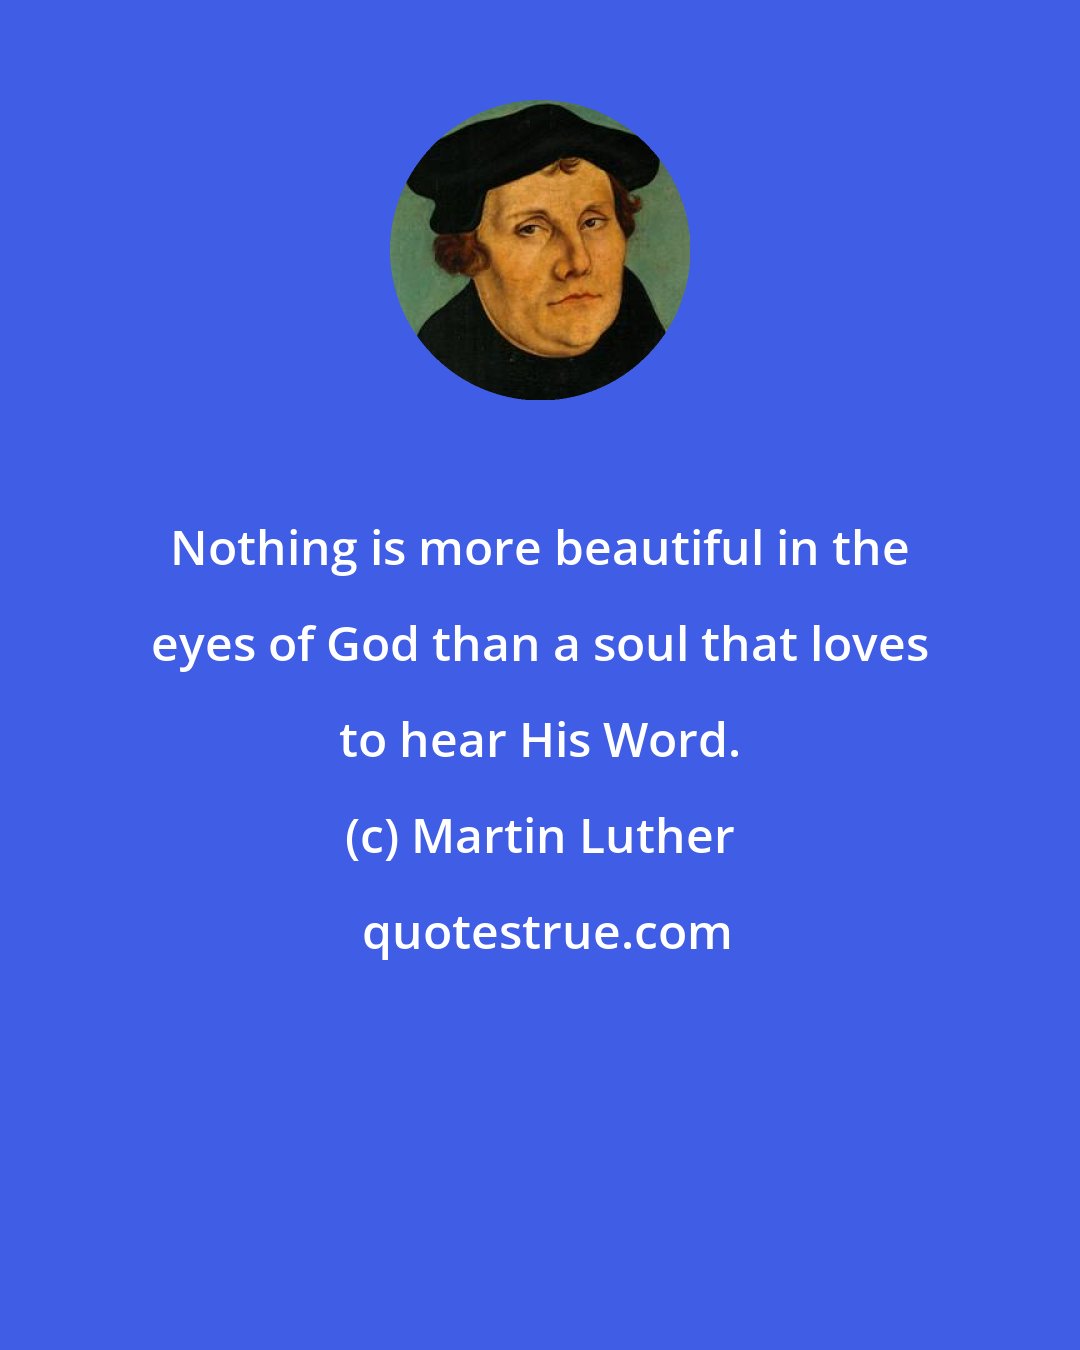 Martin Luther: Nothing is more beautiful in the eyes of God than a soul that loves to hear His Word.